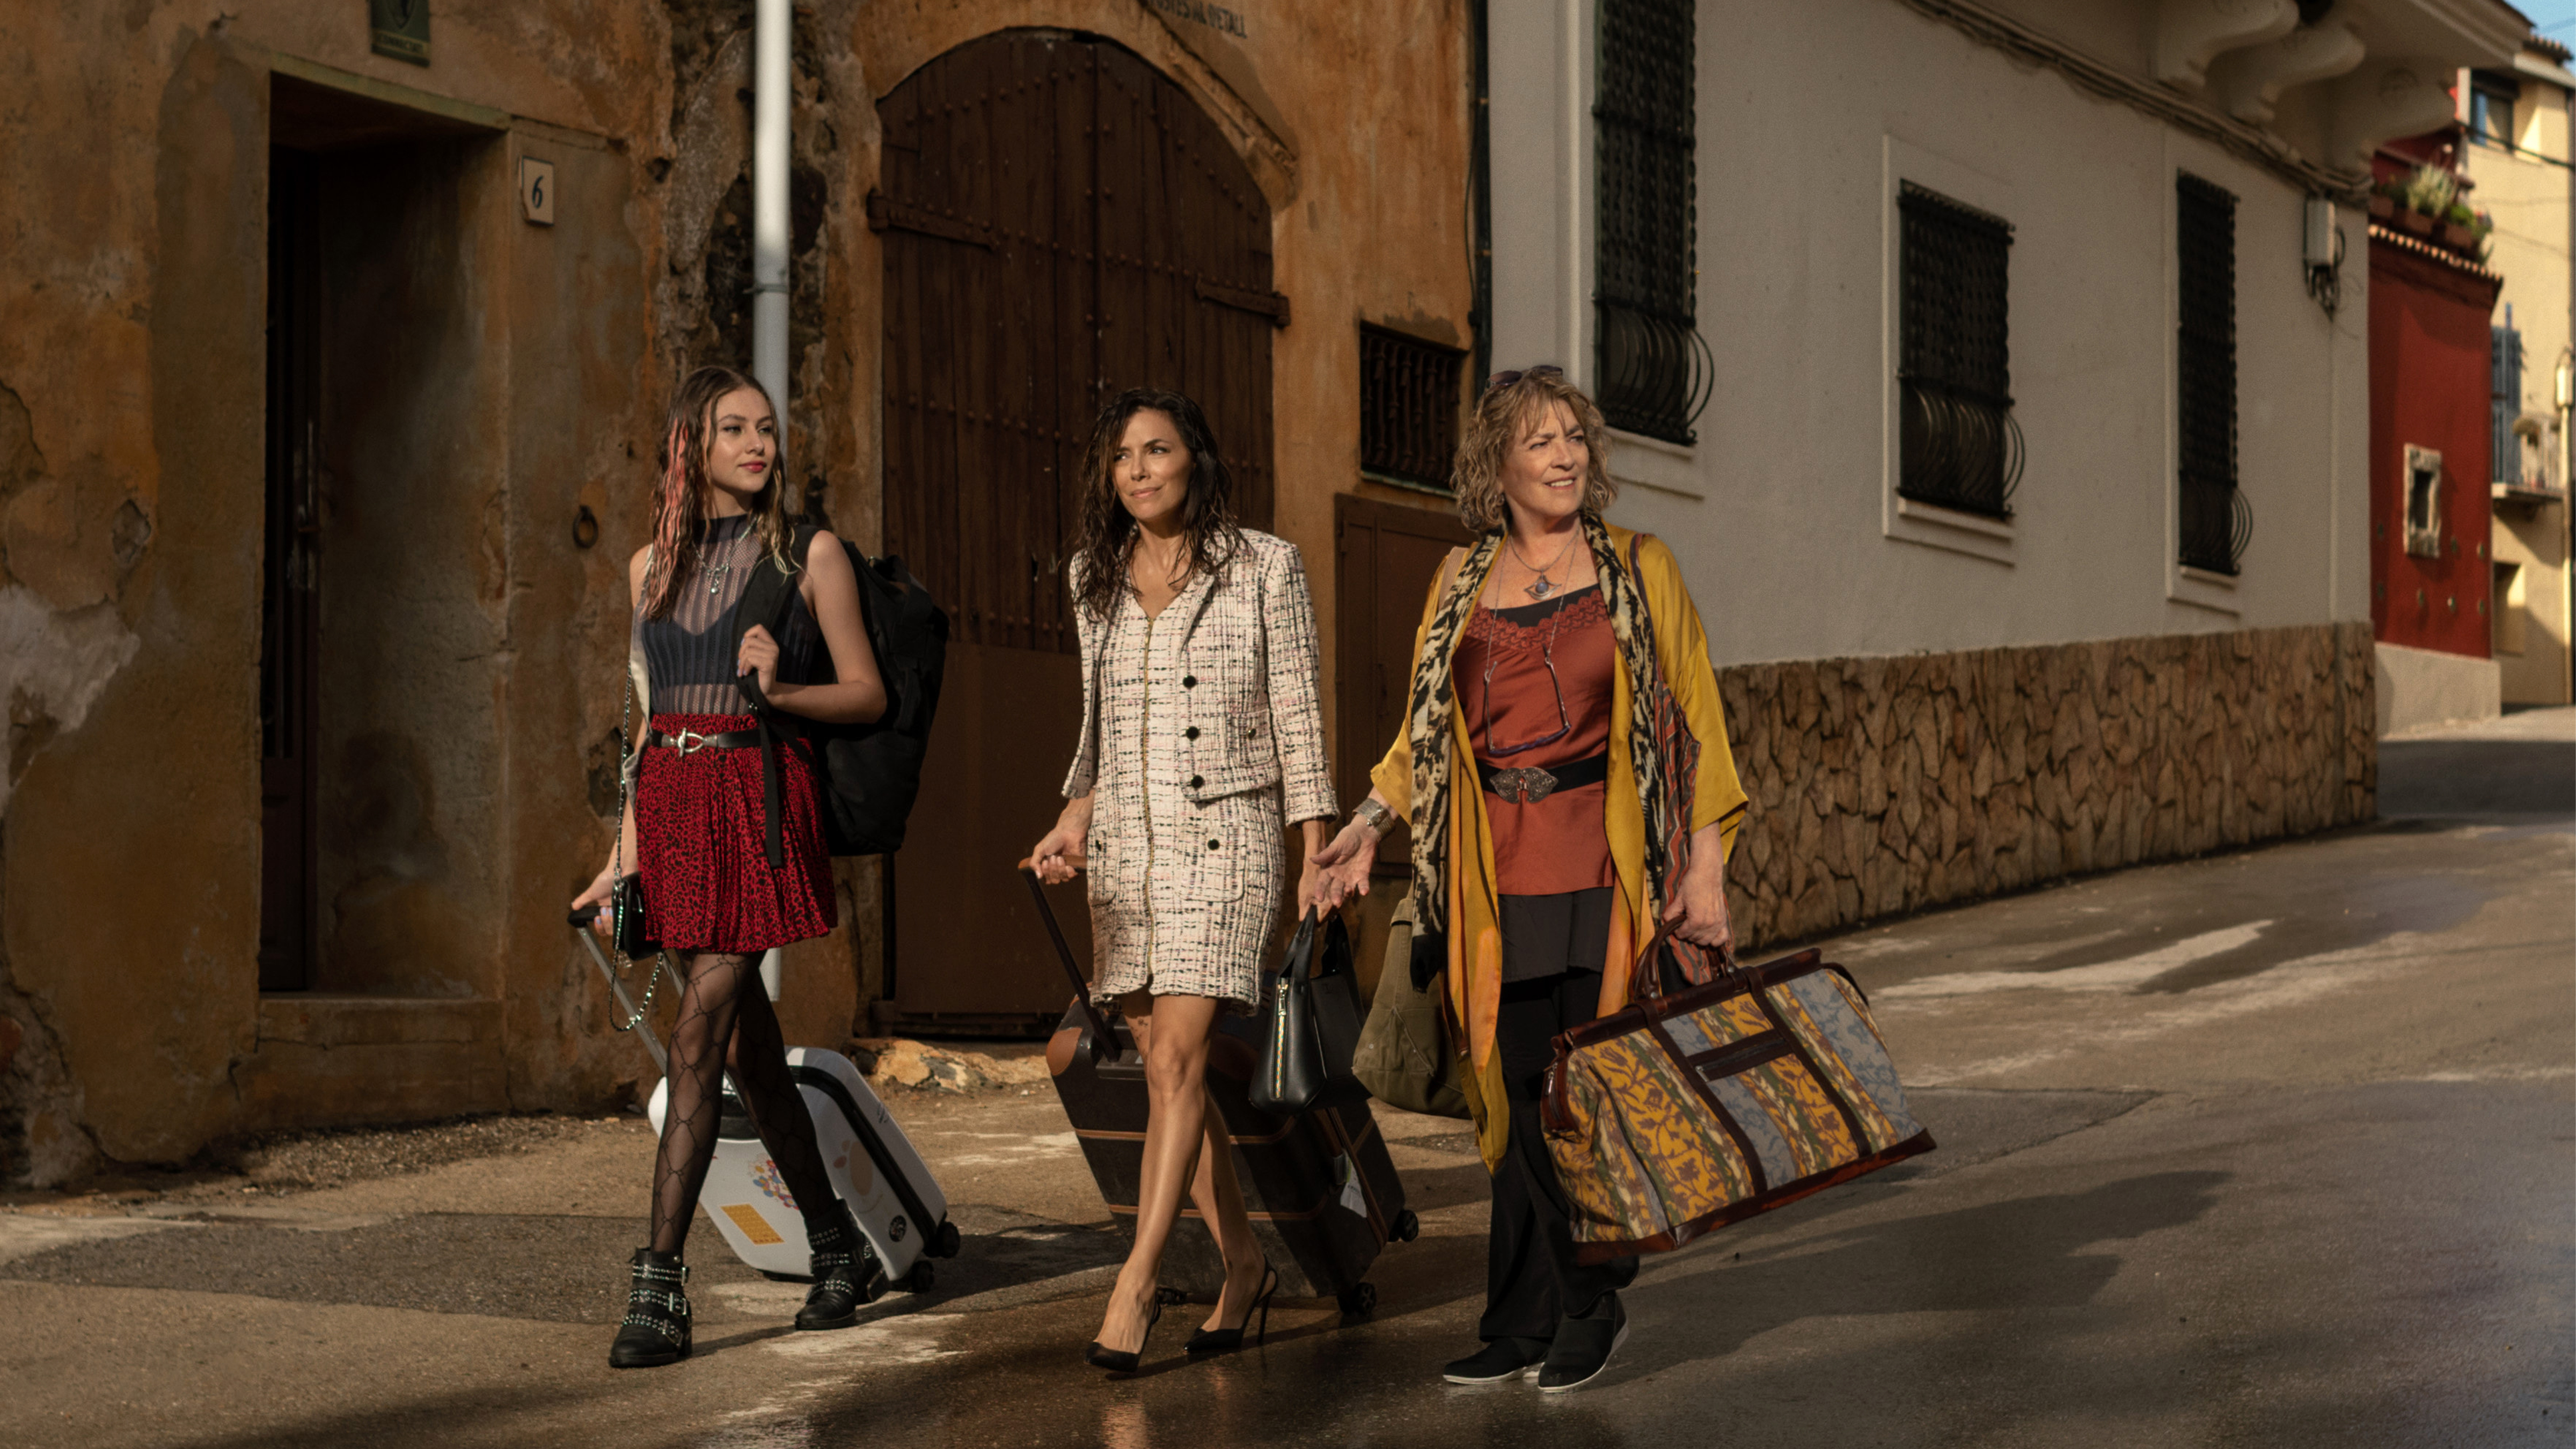 Eva Longoria walking with a suitcase in a still from the Land of Women series